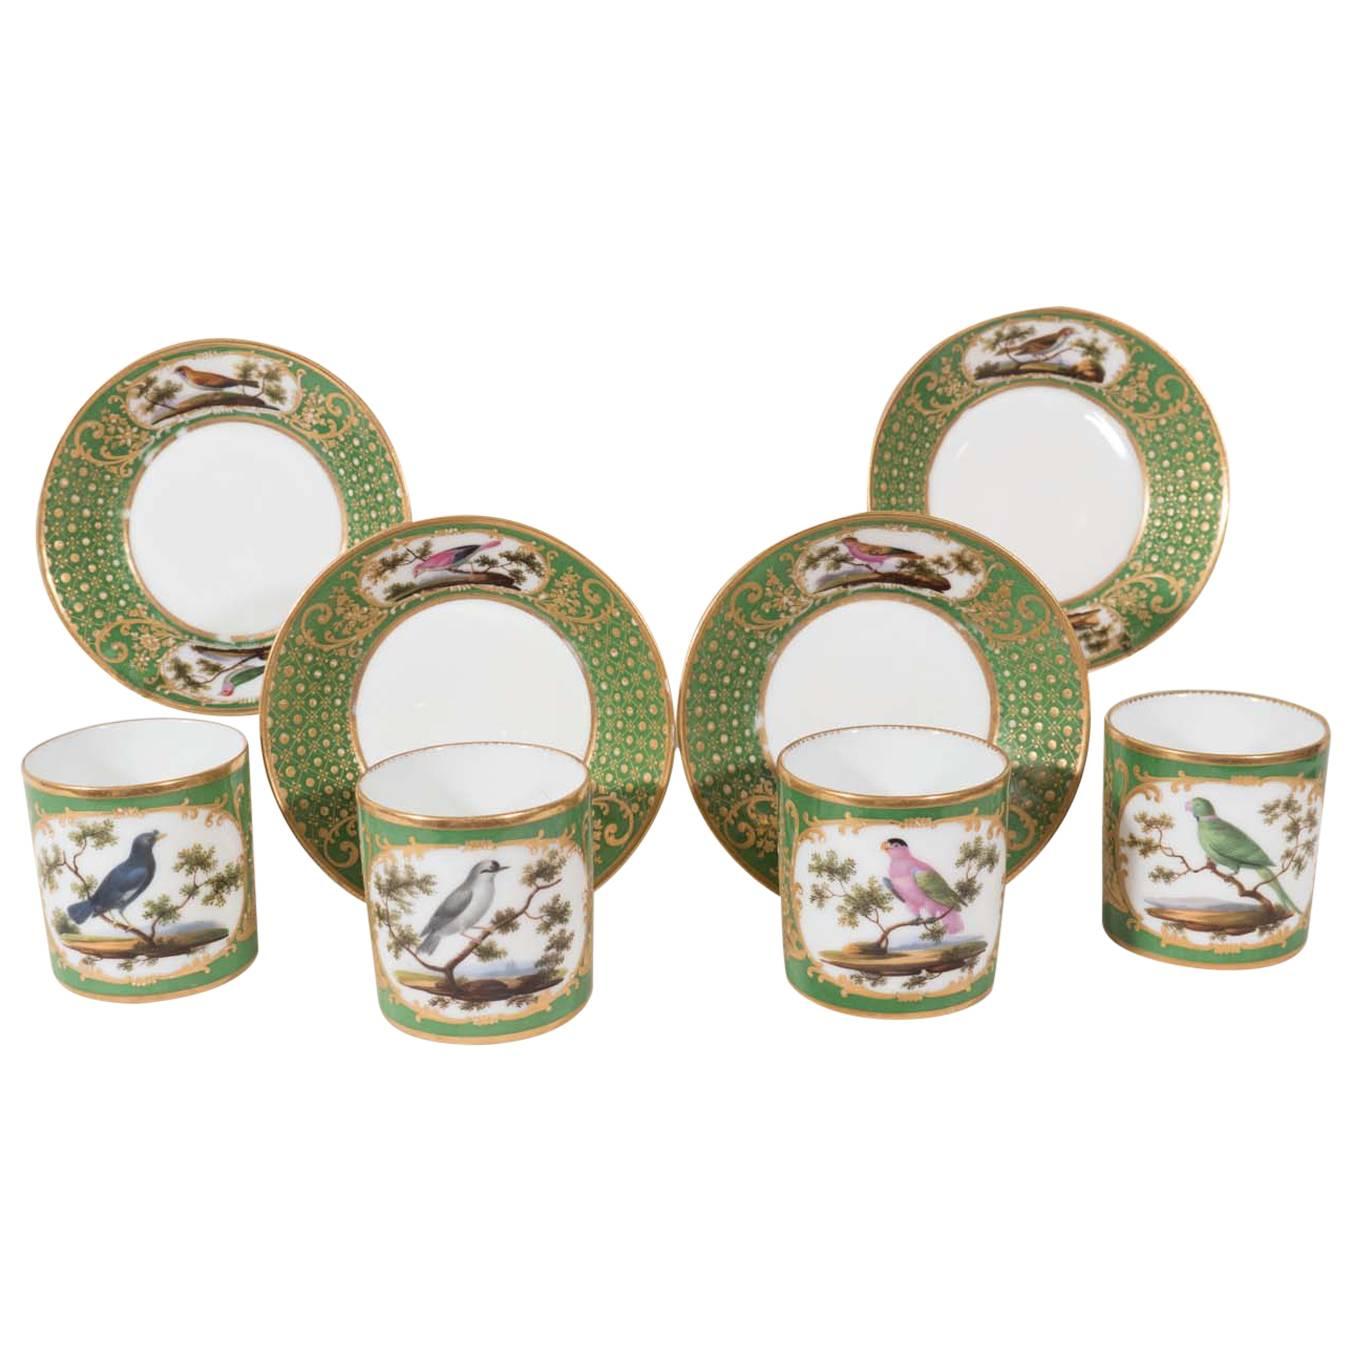 Four Paris Porcelain Coffee Cans with Hand-Painted Birds on a French Green Groun